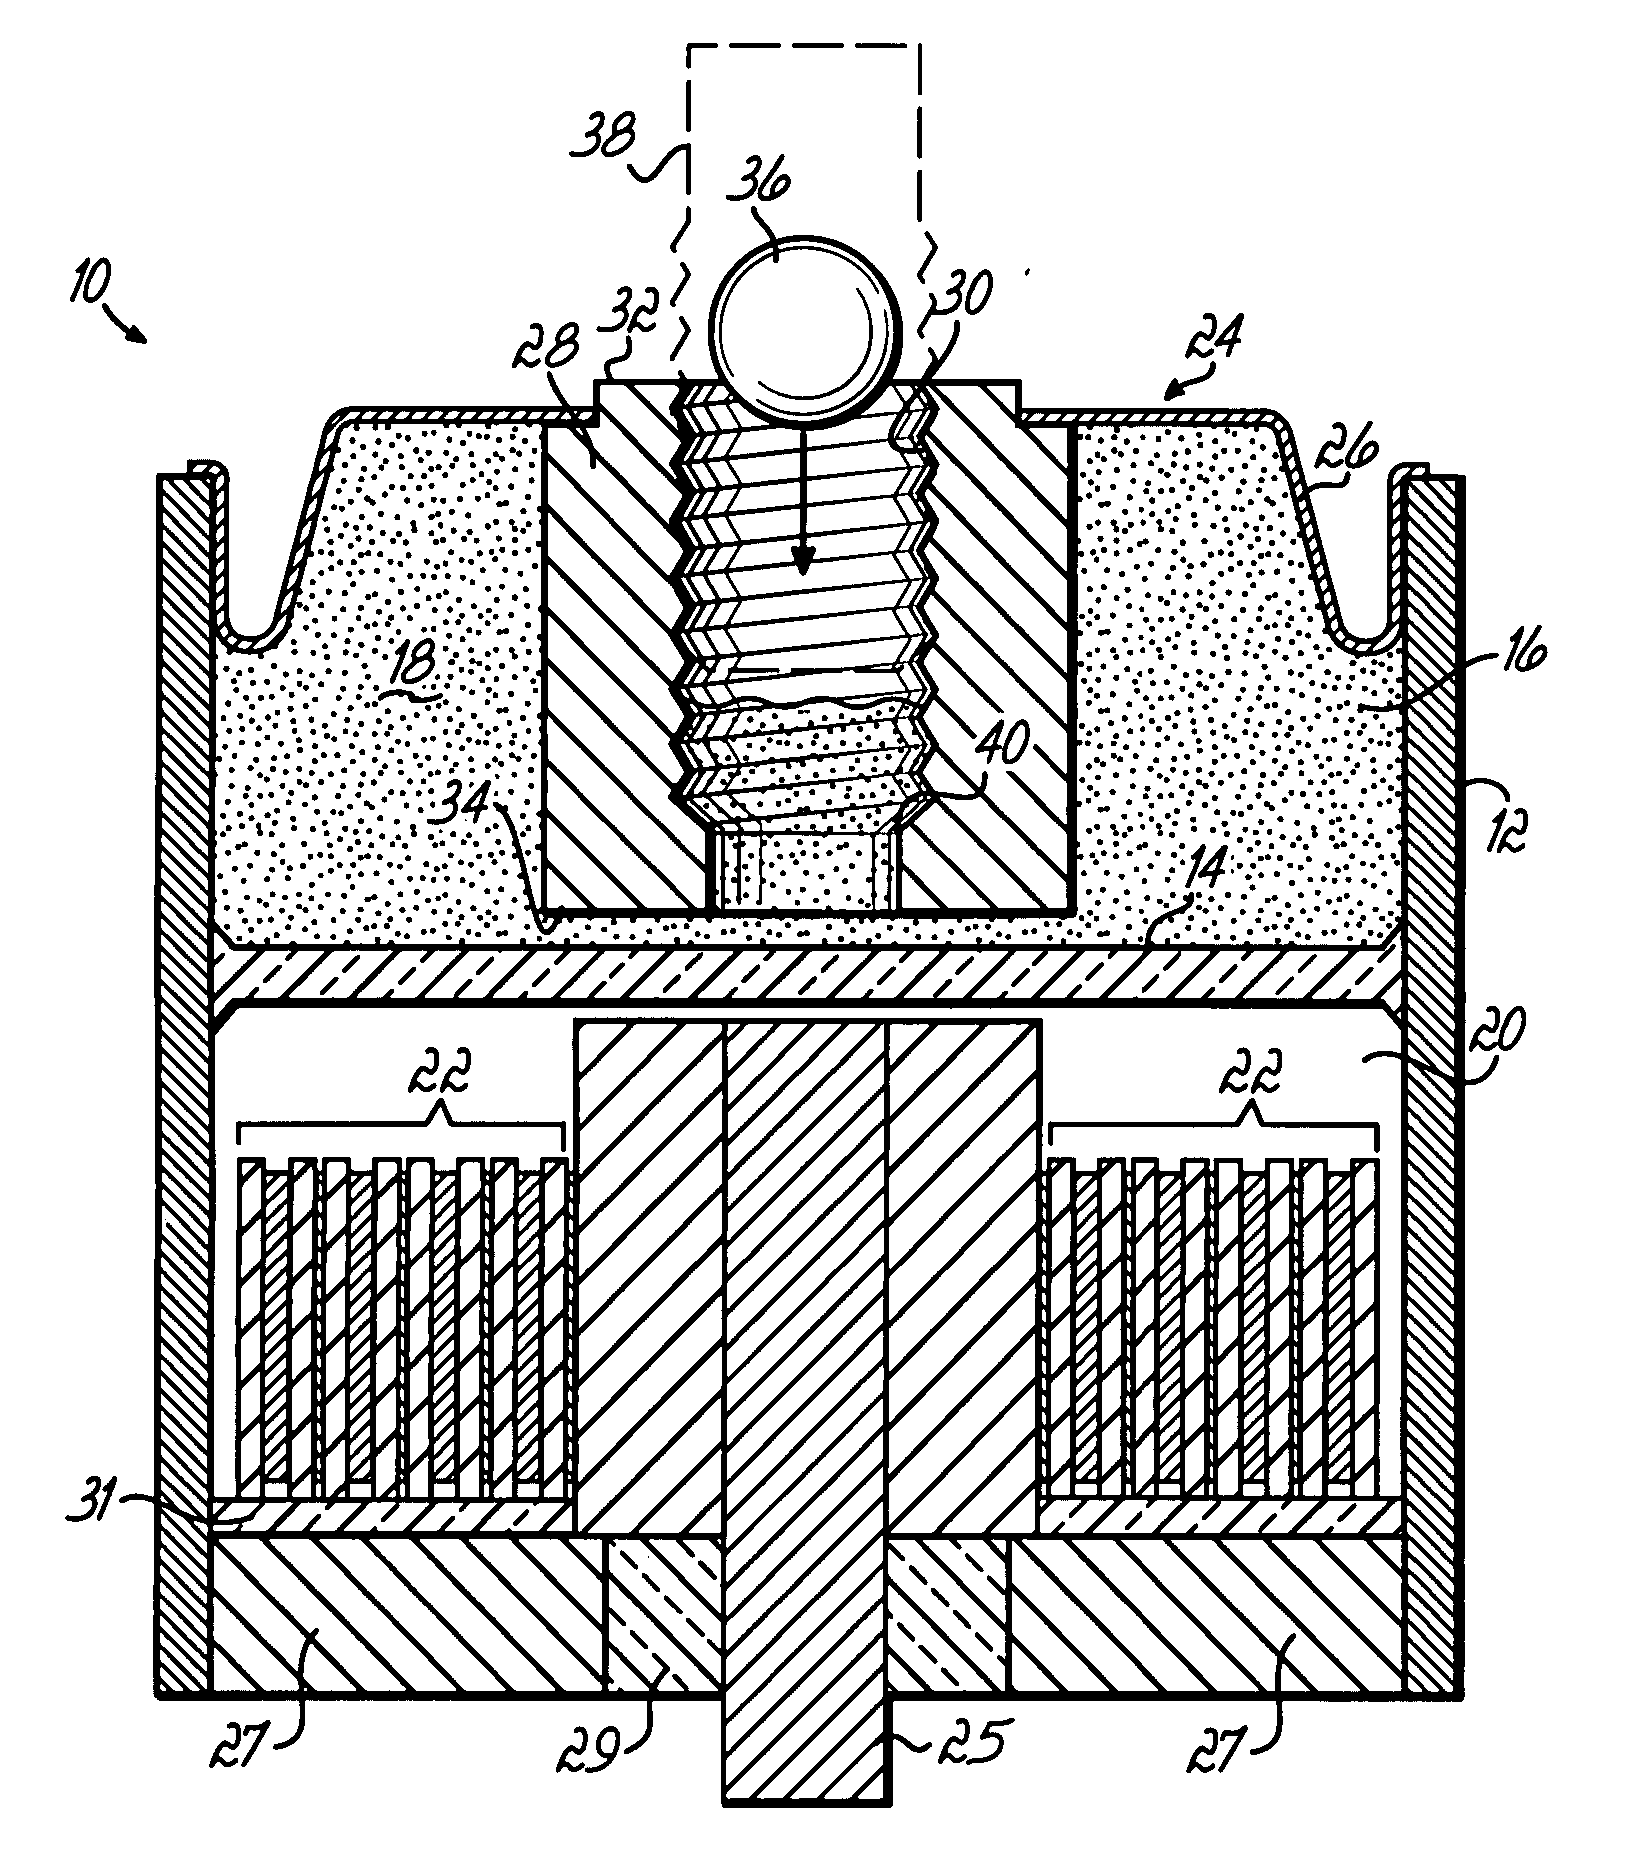 Reserve battery with set back mechanism for delayed battery activation